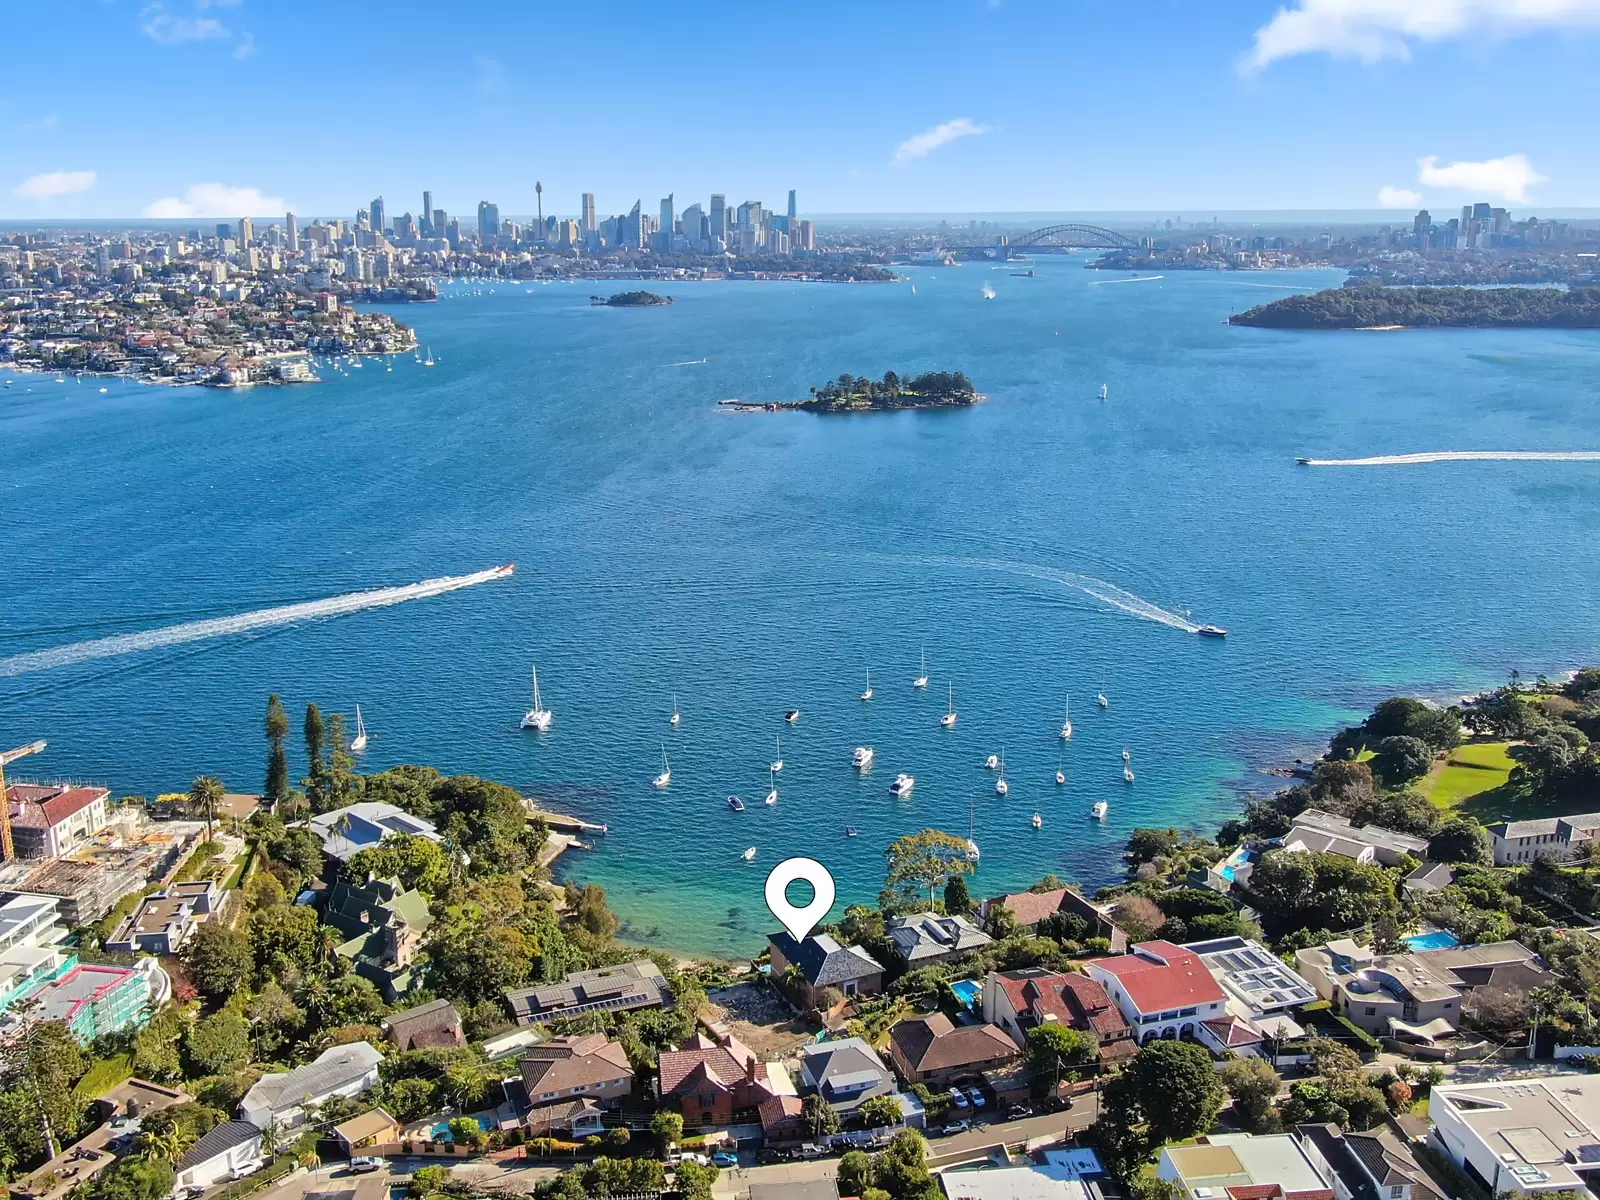 Photo #4: 10 & 12 Carrara Road, Vaucluse - For Sale by Sydney Sotheby's International Realty